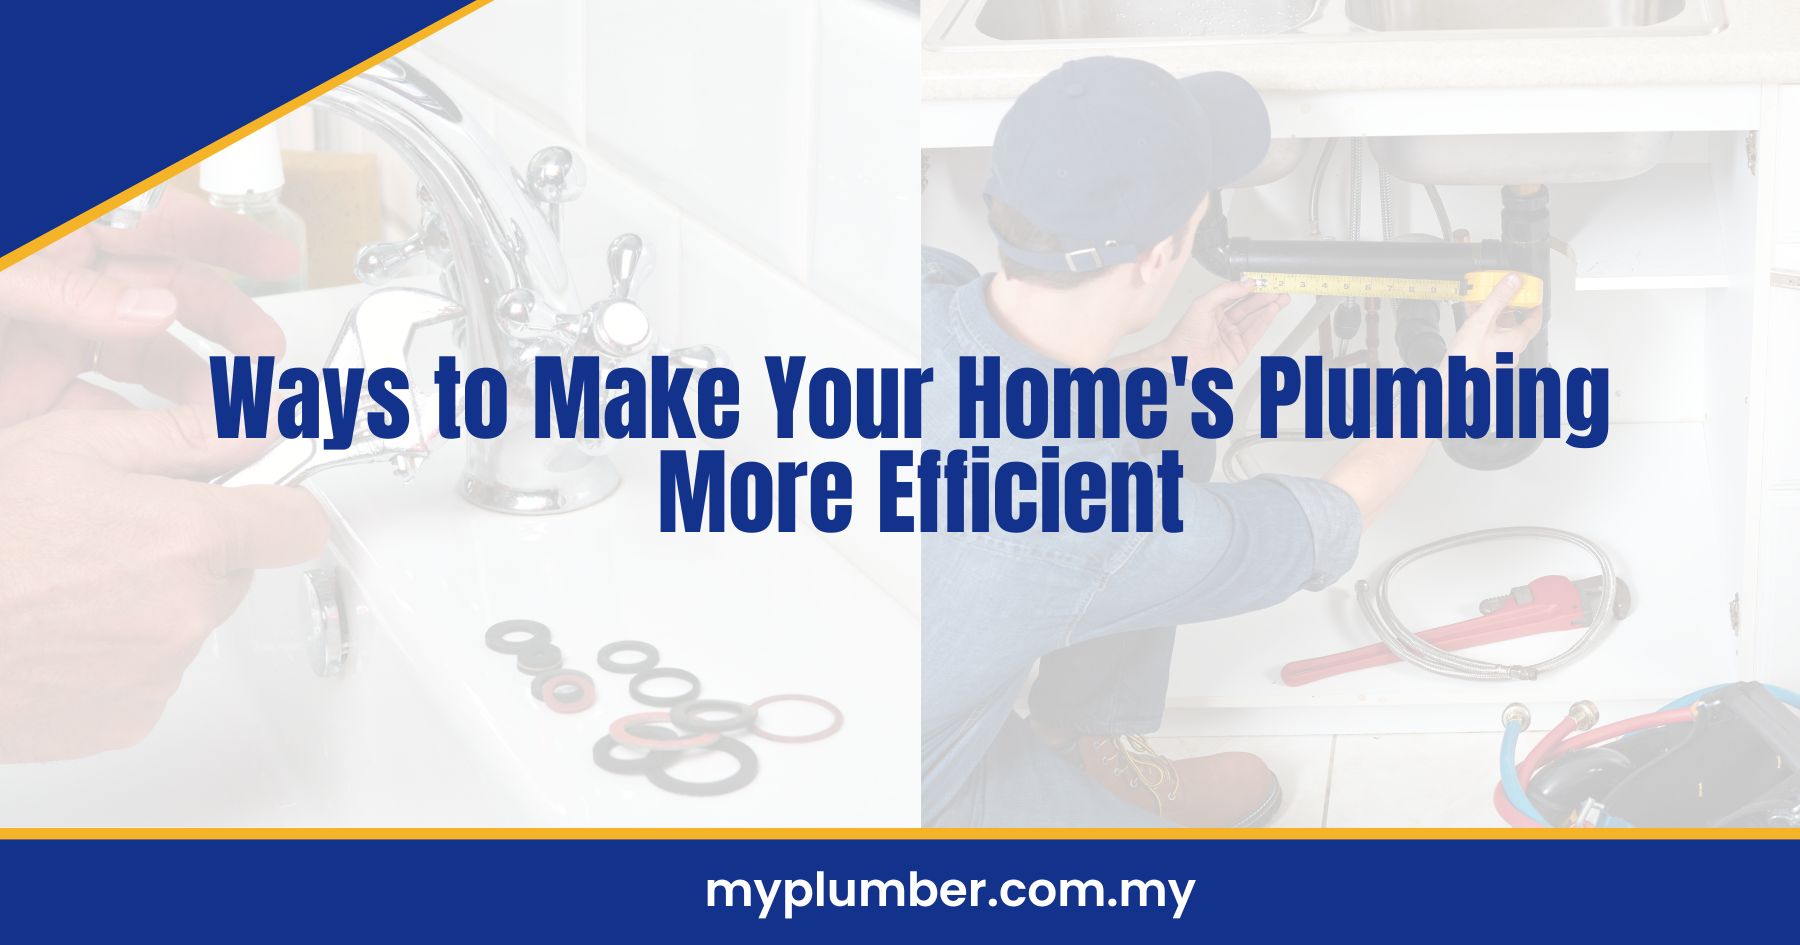 Ways to Make Your Home's Plumbing More Efficient